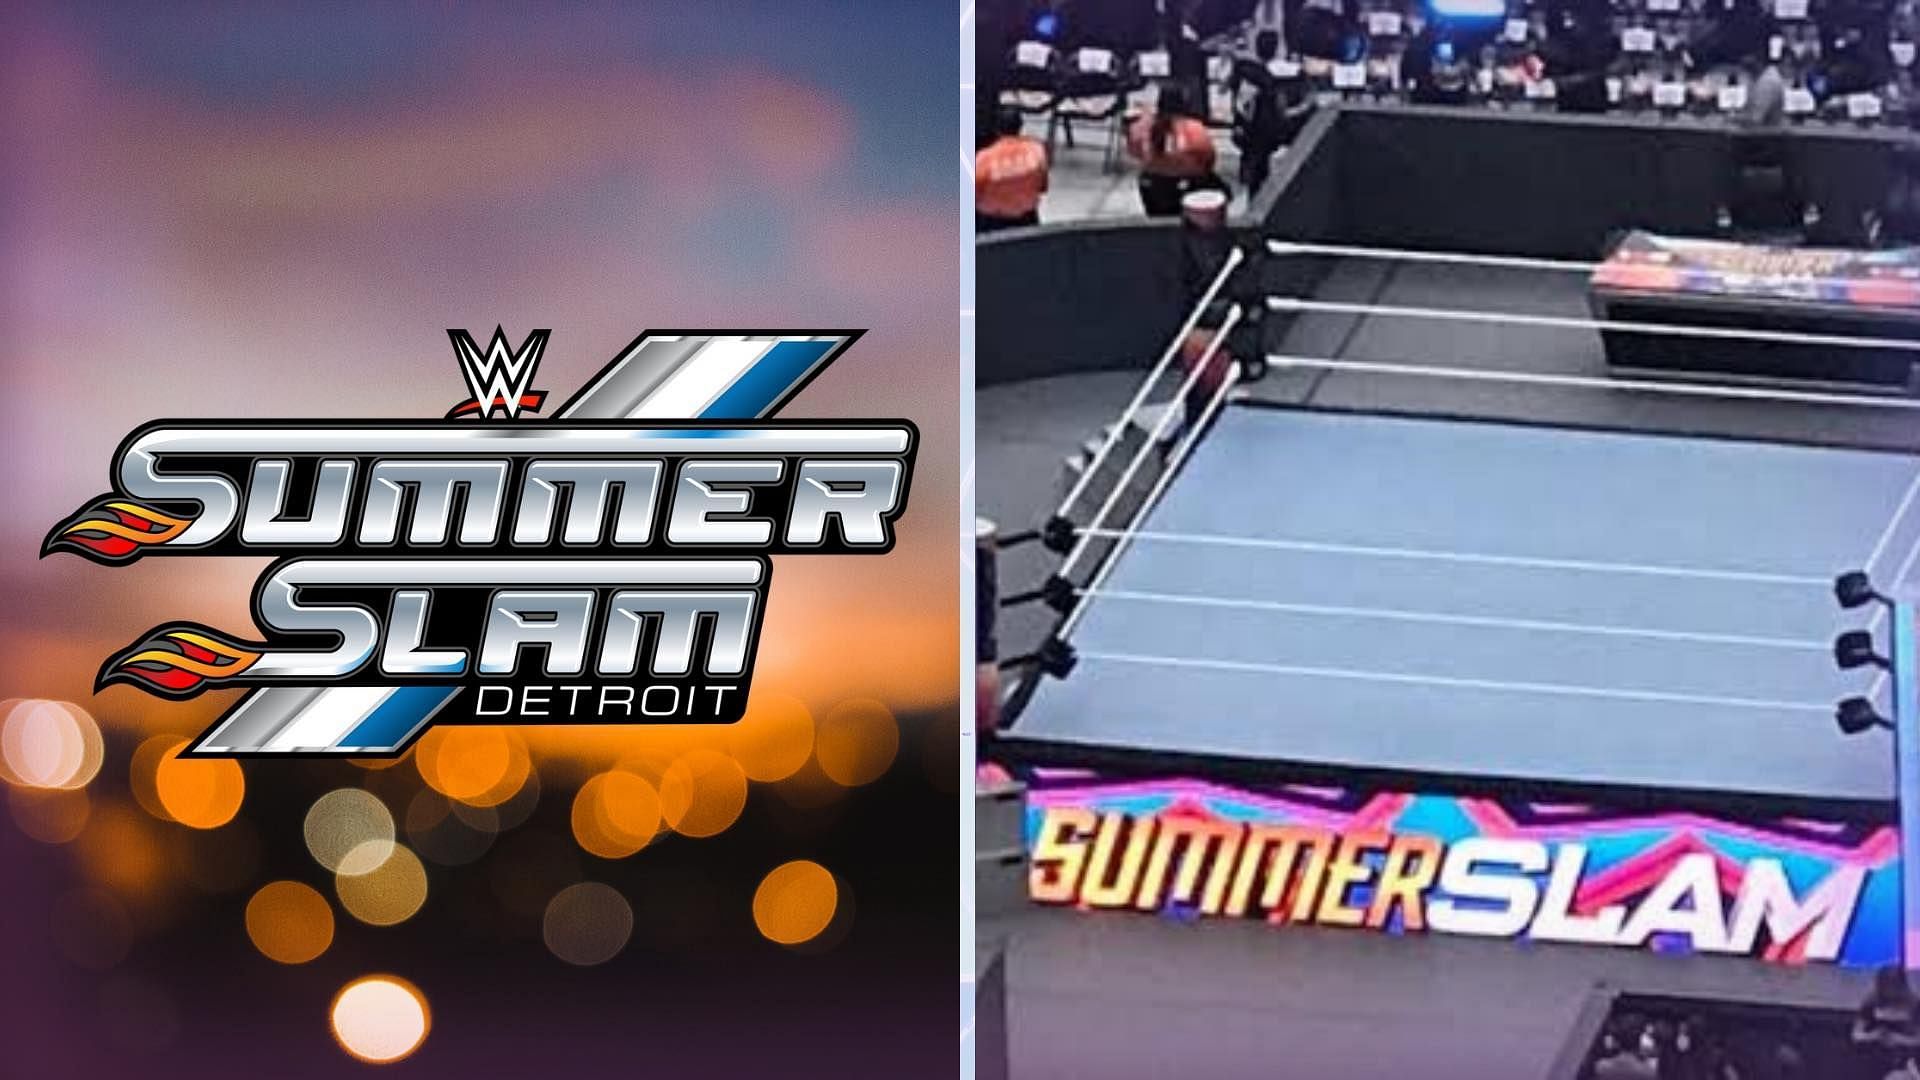 SummerSlam 2023 is set to take place at Detroit, Michigan